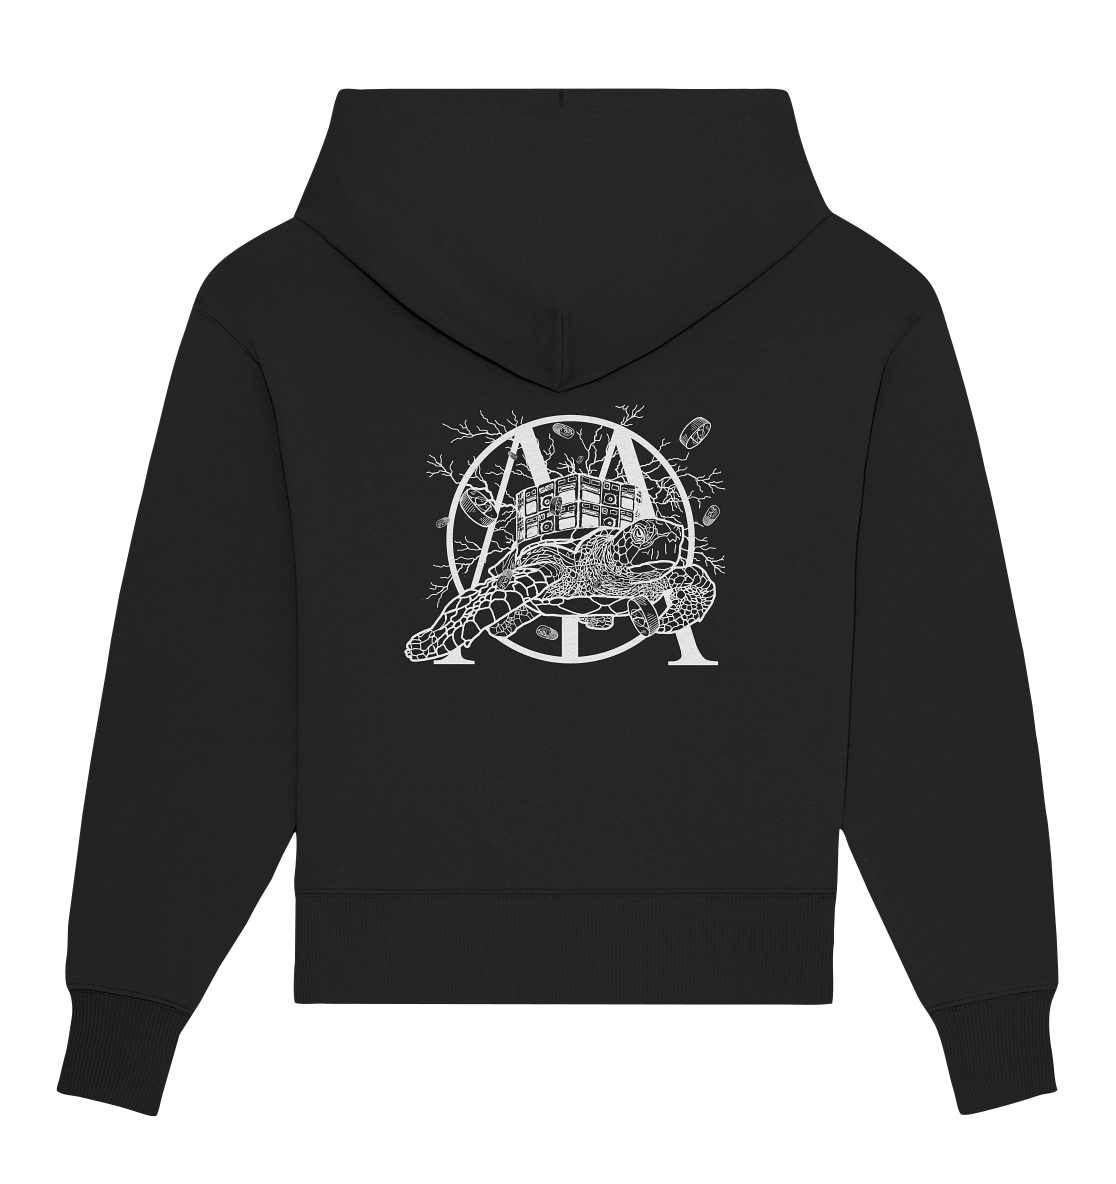 back-organic-oversize-hoodie-272727-1116x-9.png